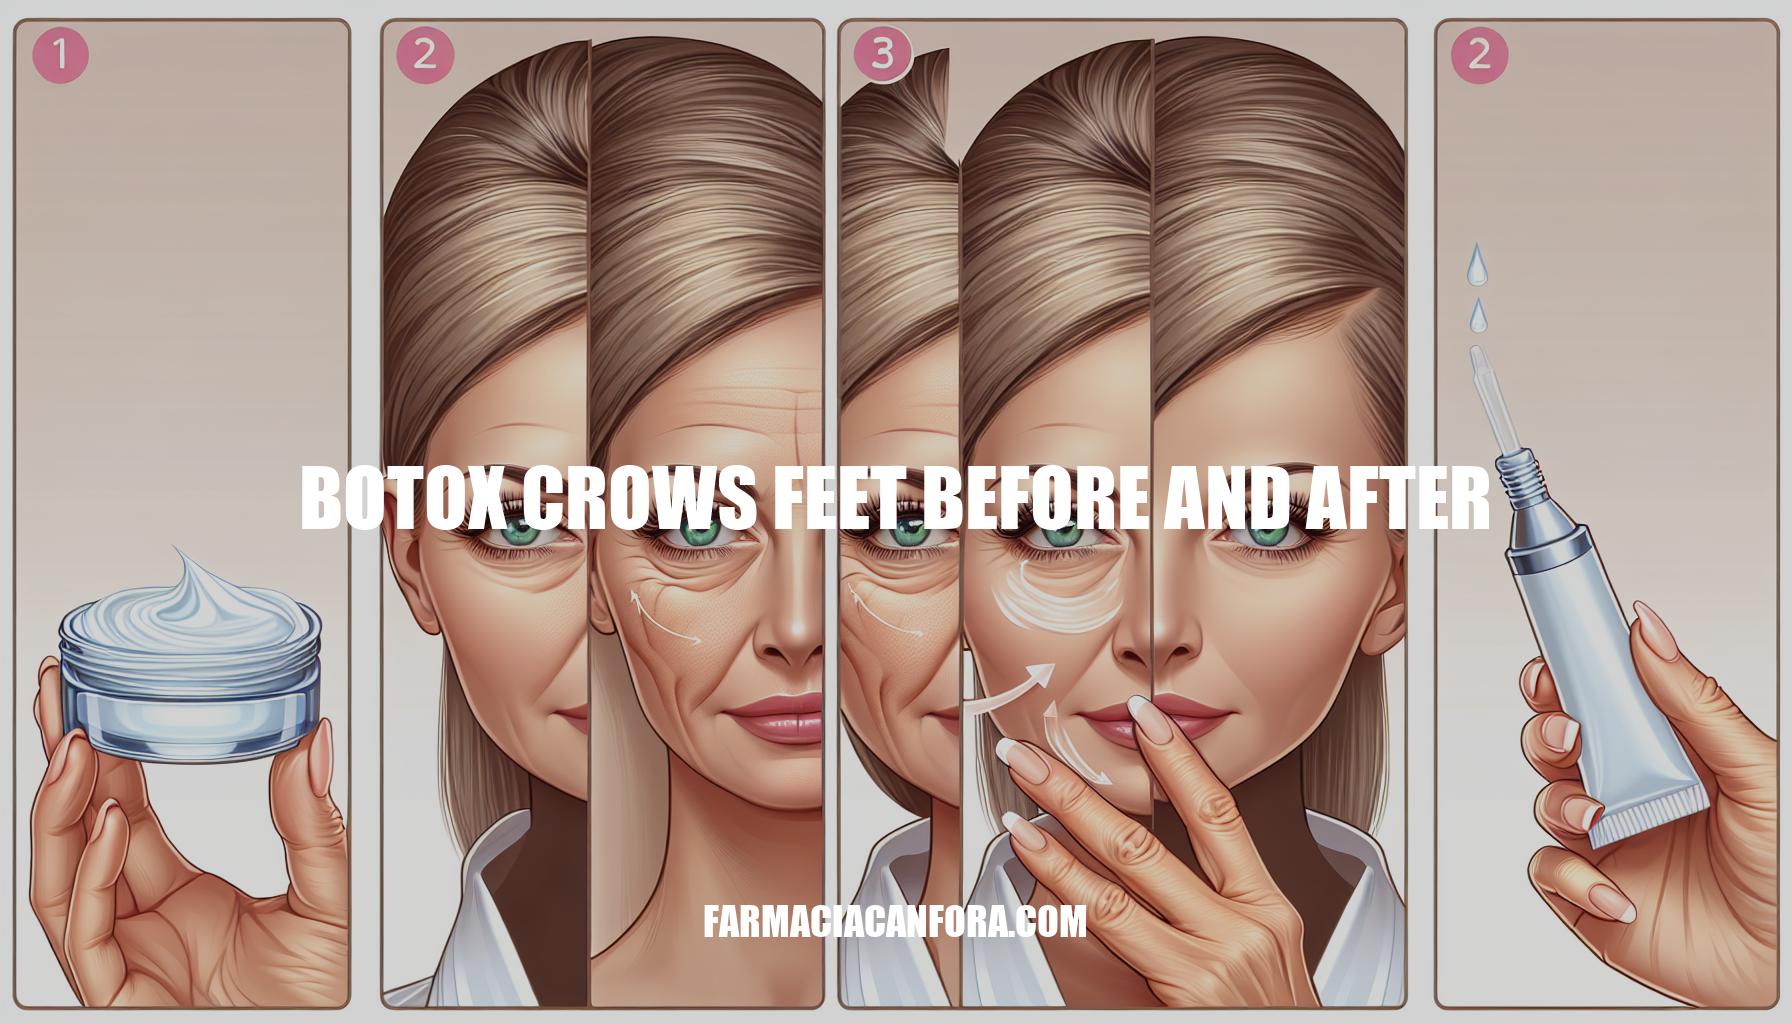 Botox for Crow's Feet: Before and After Treatment Guide